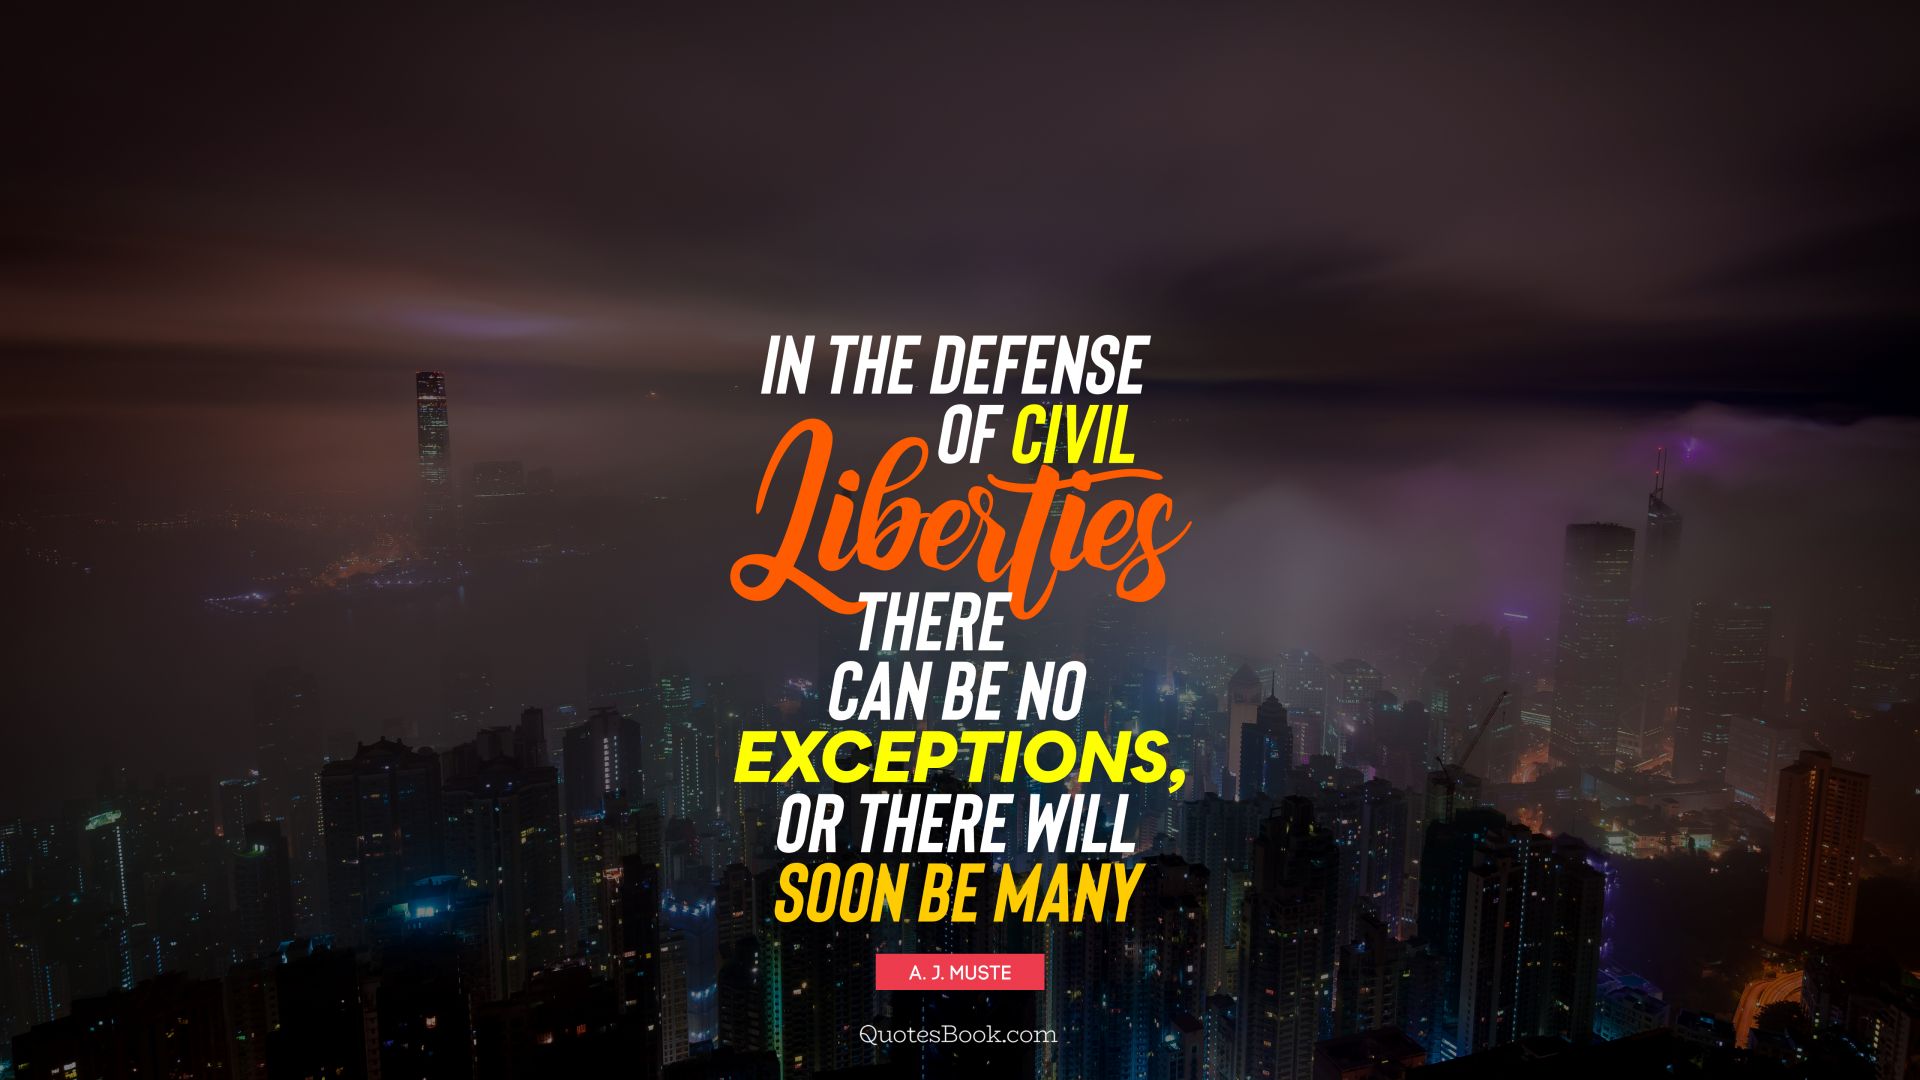 In the defense of civil liberties there can be no exceptions, or there will soon be many. - Quote by A. J. Muste